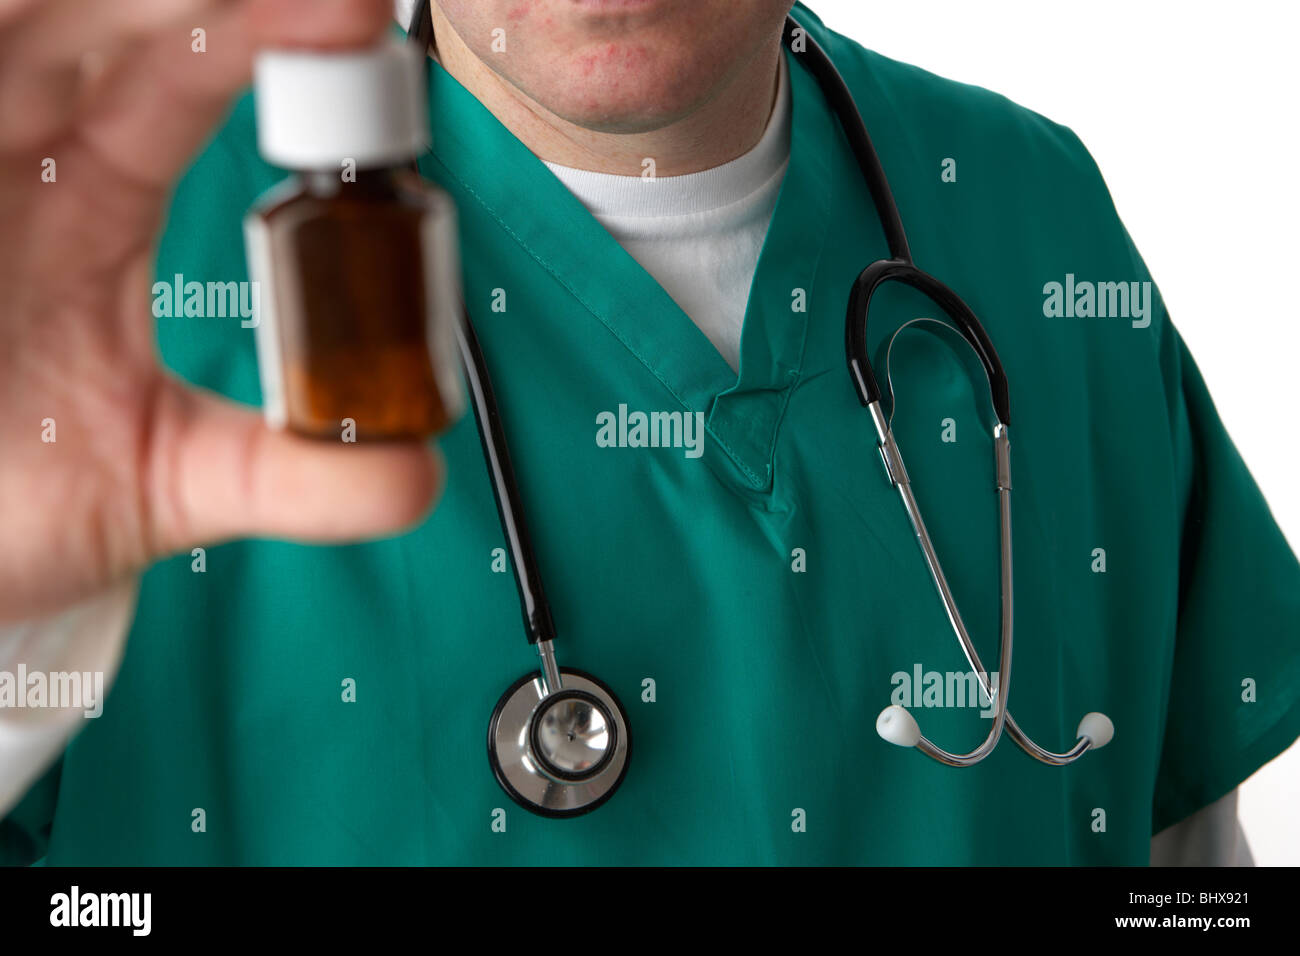 man wearing medical scrubs and stethoscope holding and looking at a small bottle of pills Stock Photo